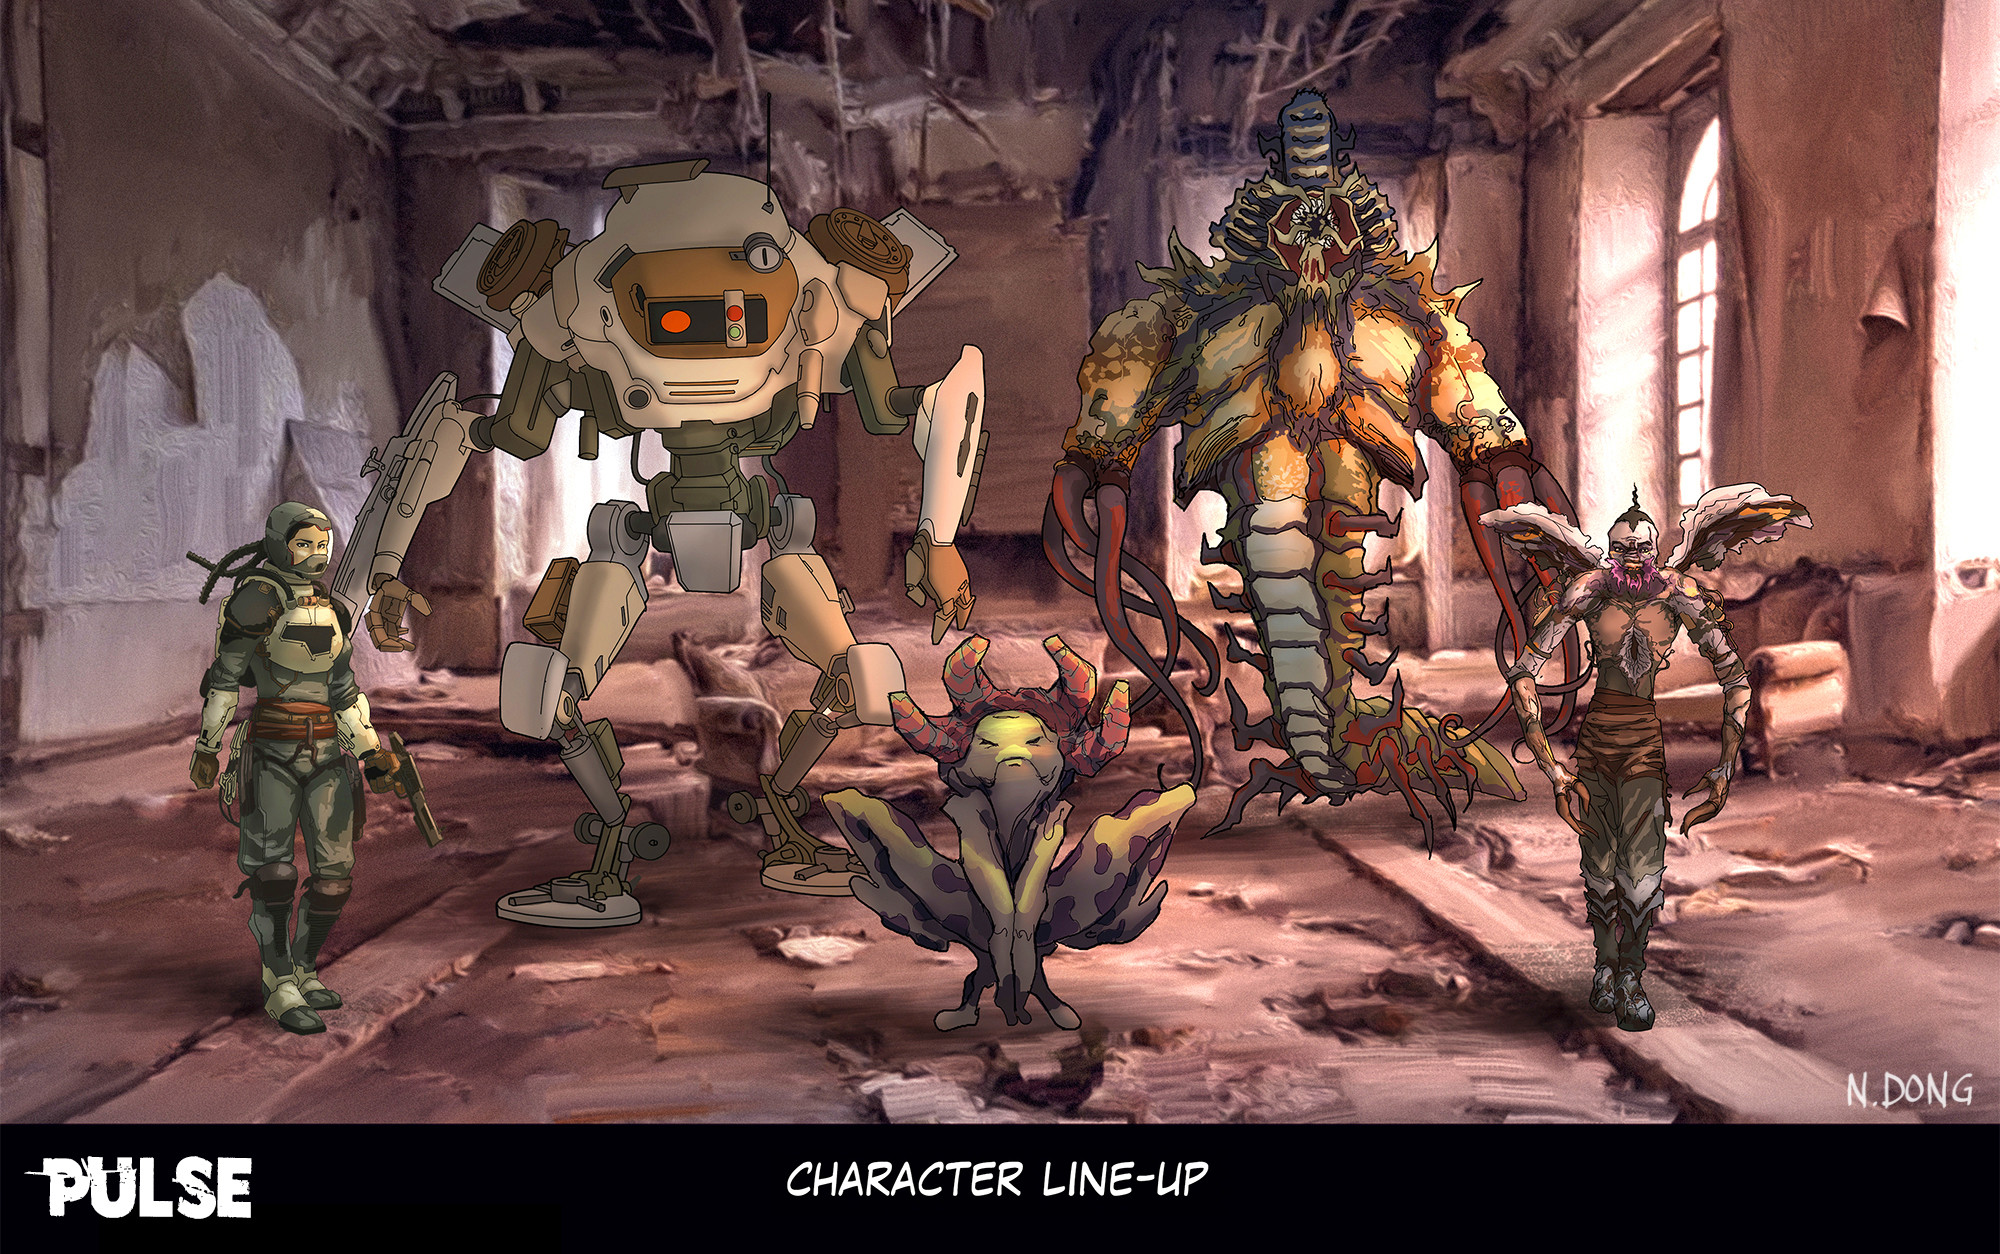 Character Line-Up